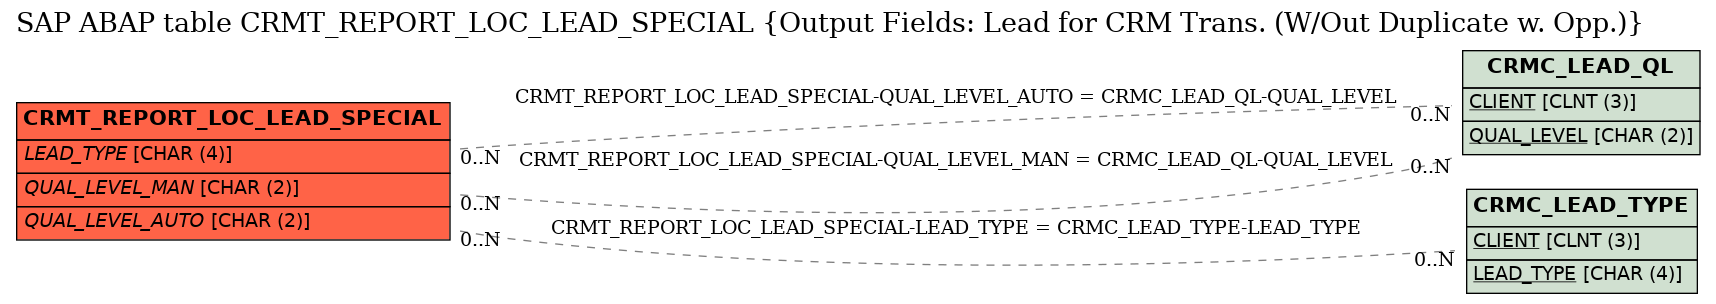 E-R Diagram for table CRMT_REPORT_LOC_LEAD_SPECIAL (Output Fields: Lead for CRM Trans. (W/Out Duplicate w. Opp.))